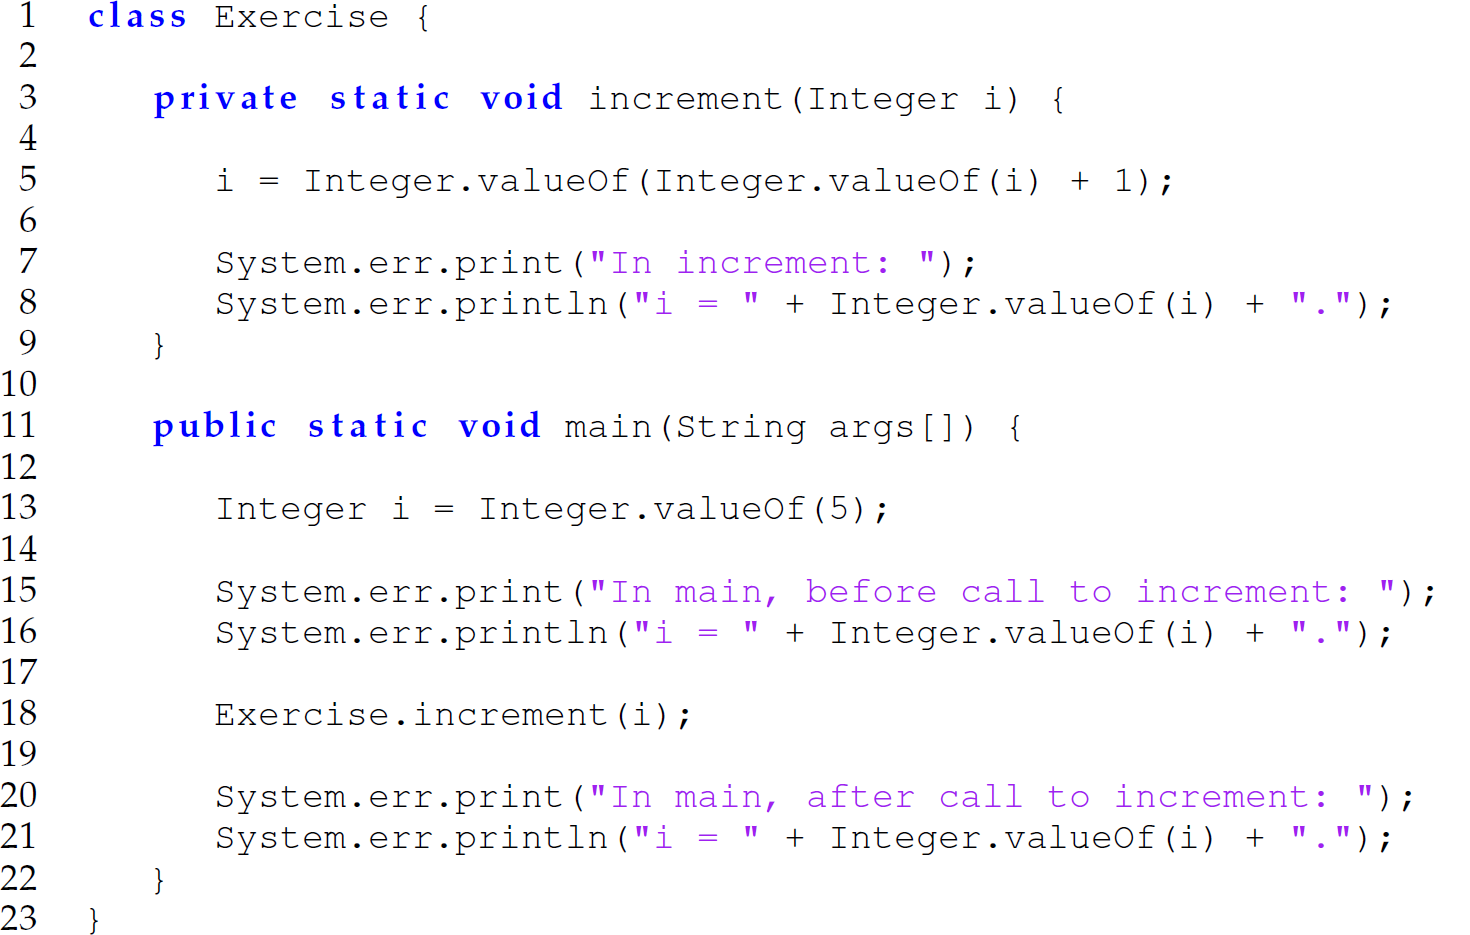 A set of 23 code lines in a Java program.